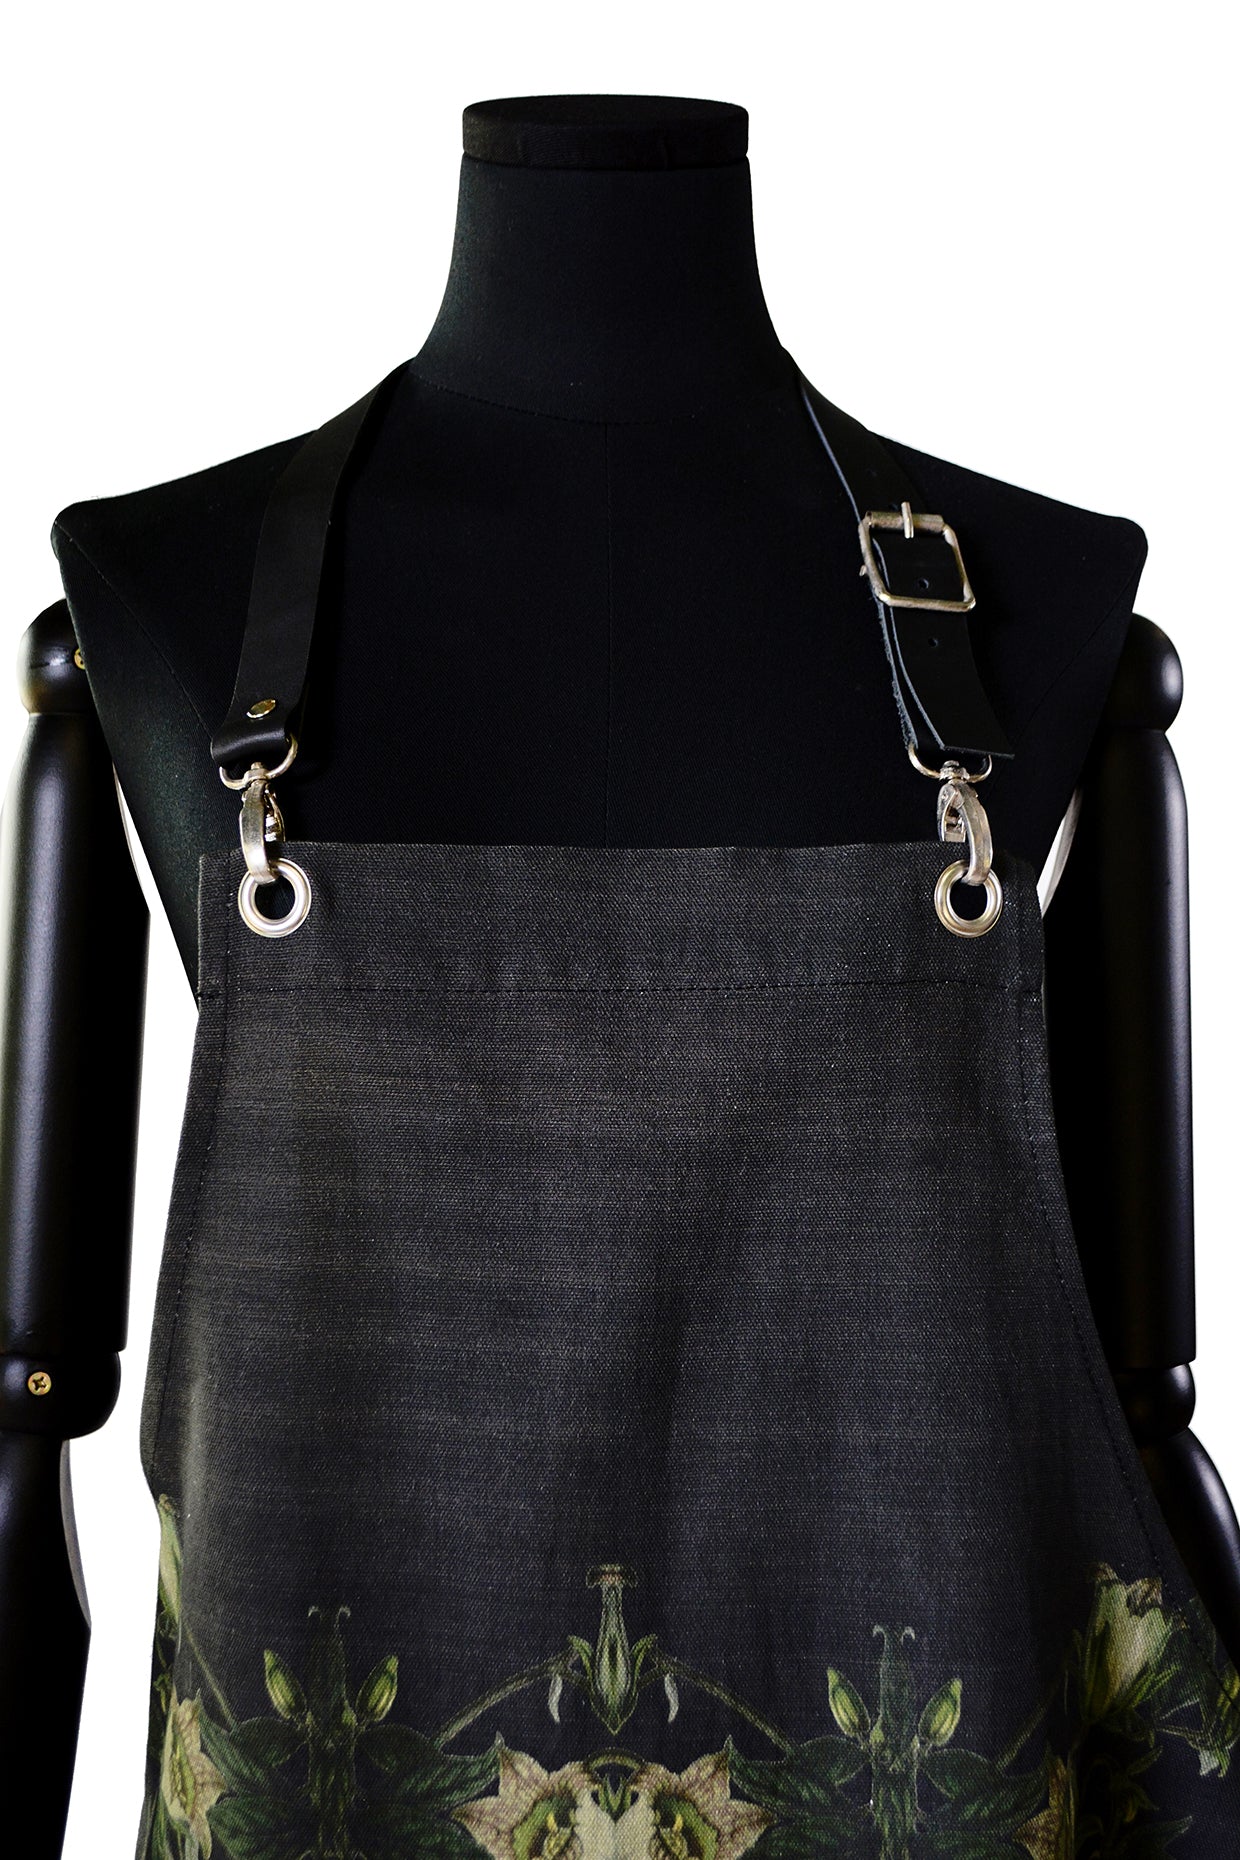 Apron with Leather Straps - Black